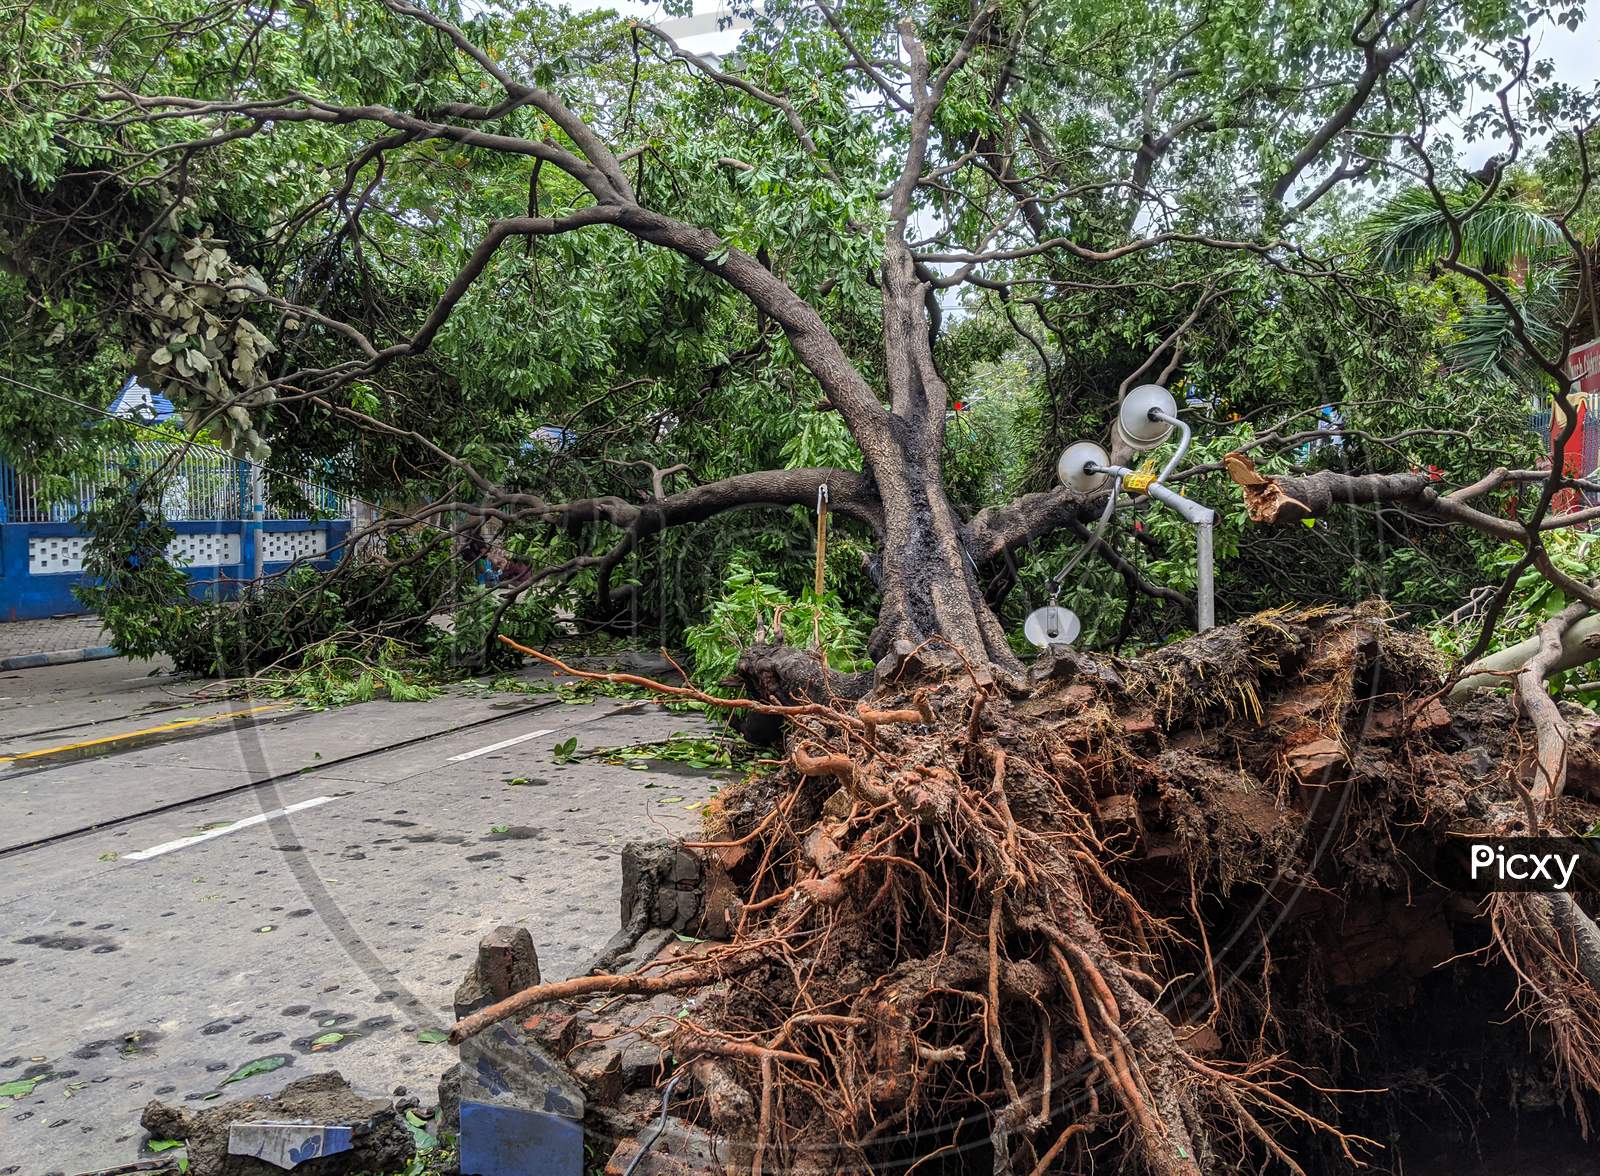 Effect Of The Super Severe Cyclonic Amphan On The Road Of Kolkata In India.